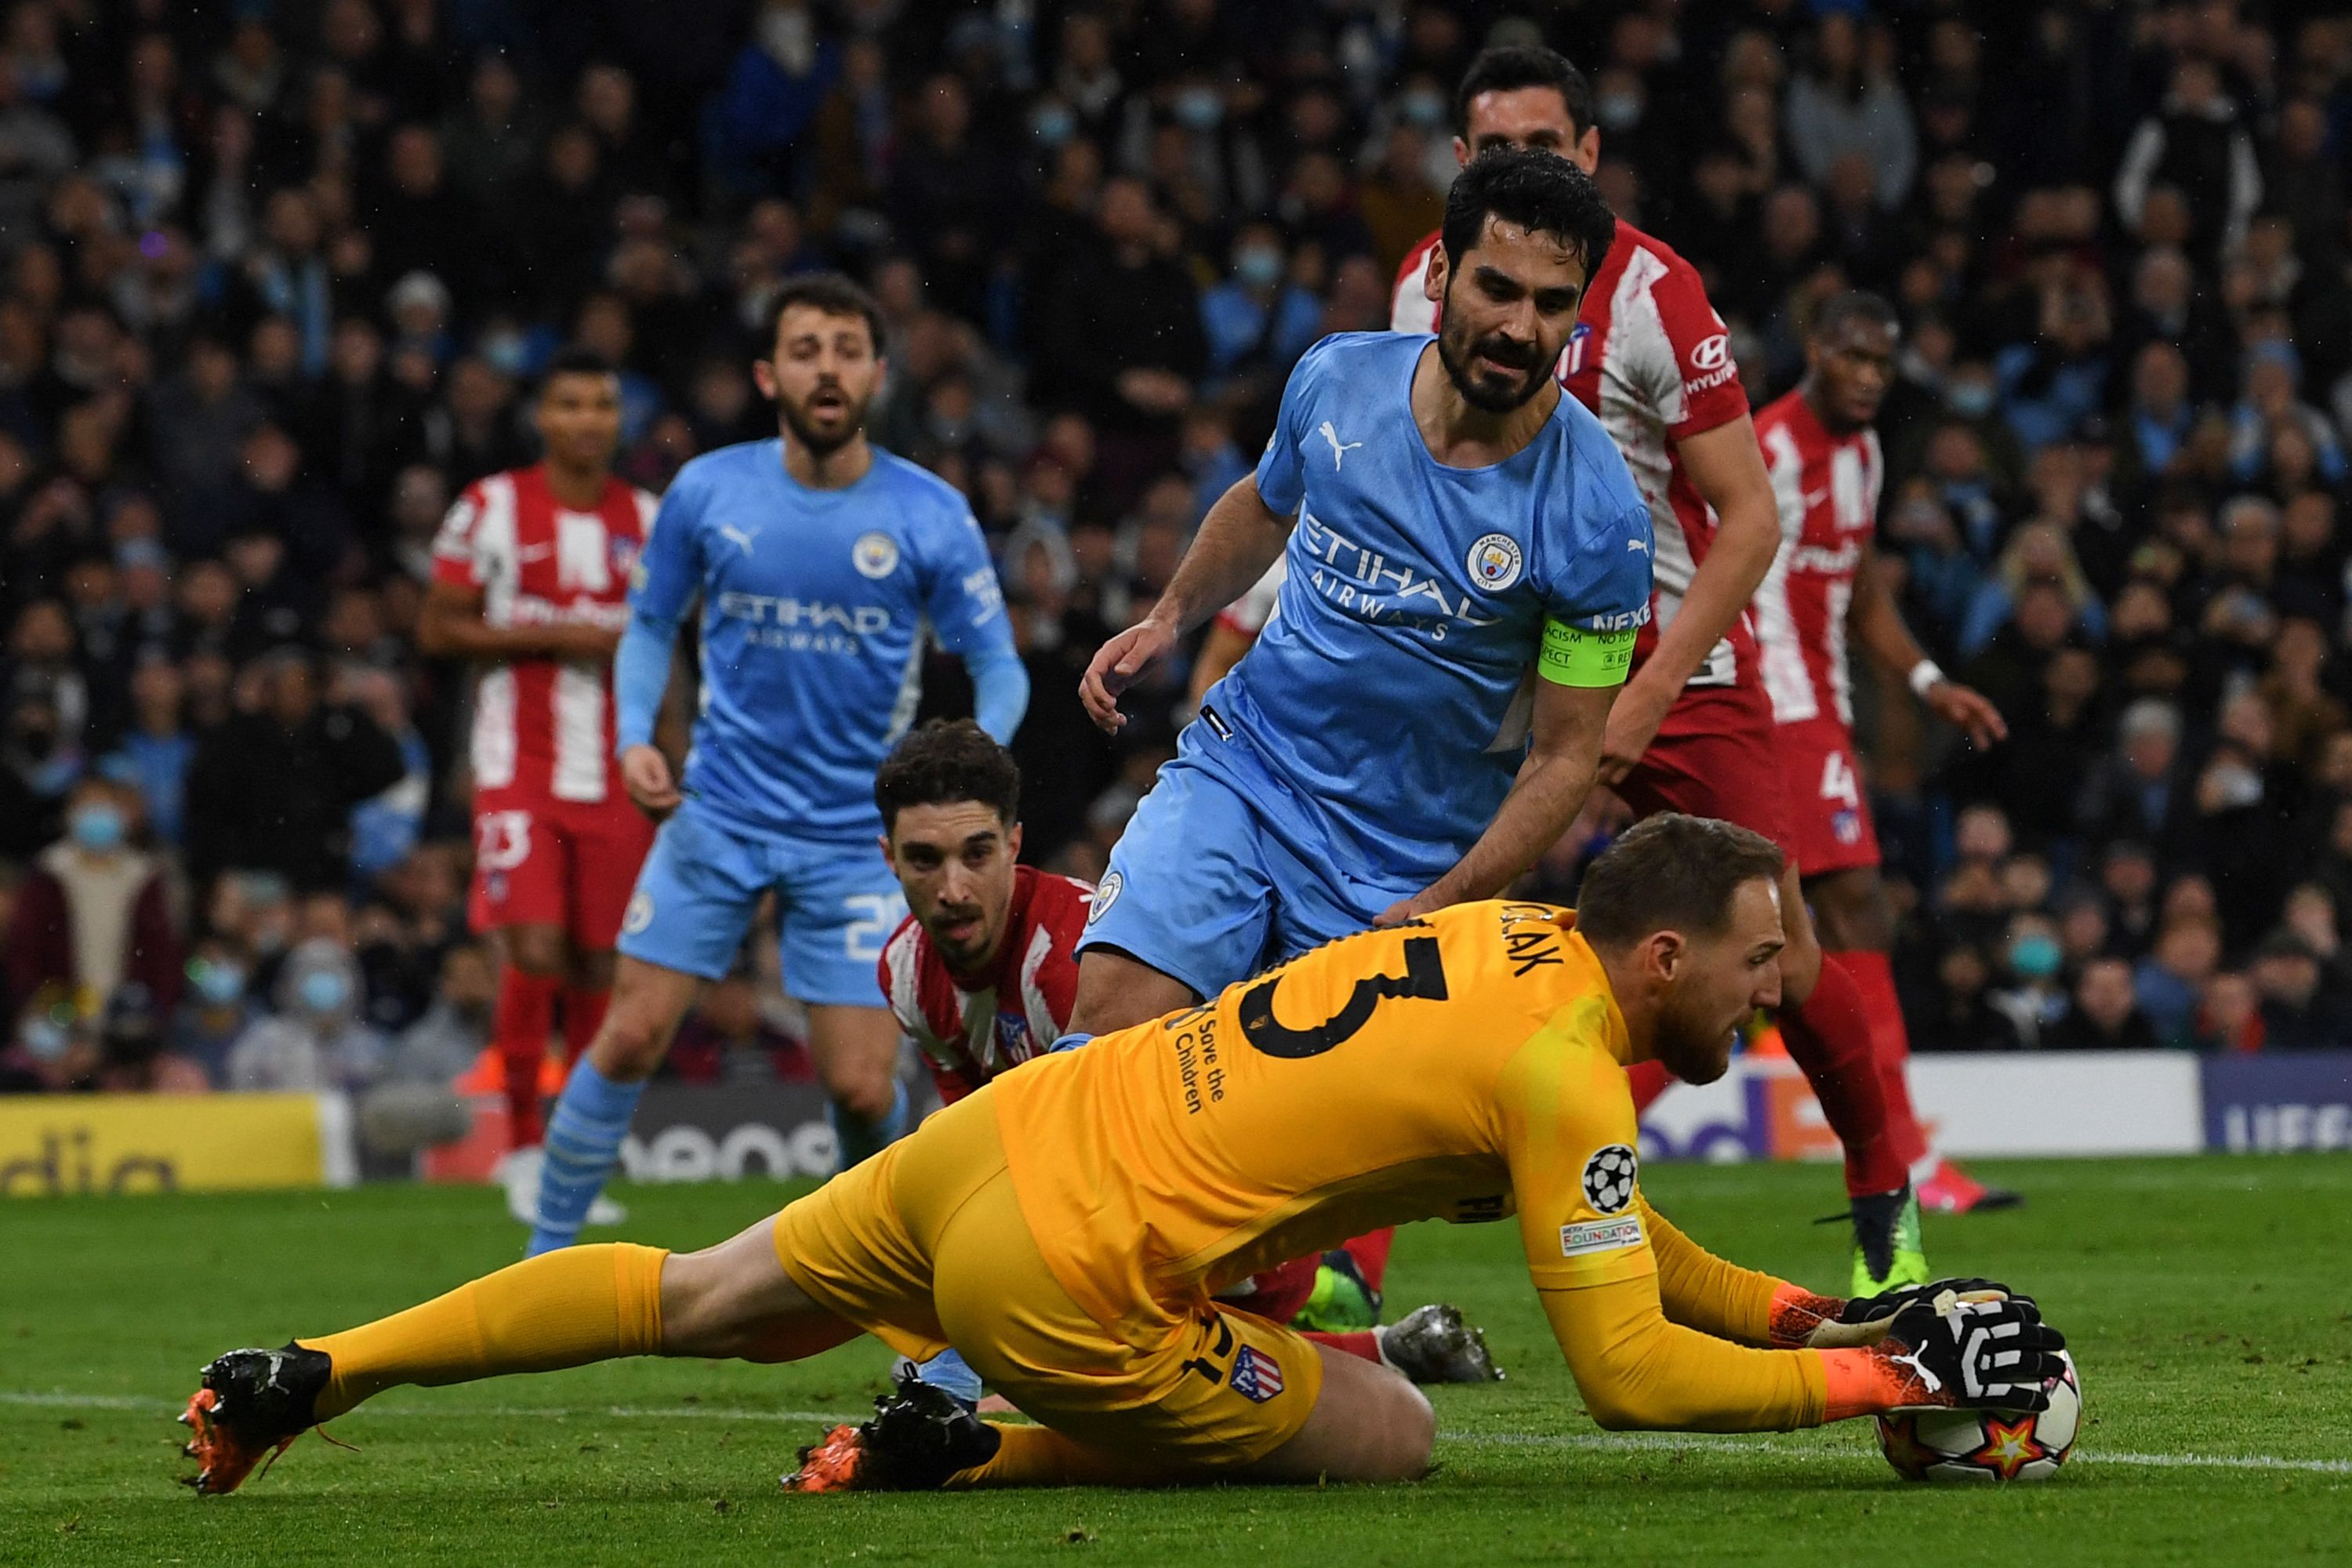 Manchester City beat Atletico Madrid 1-0: Kevin De Bruyne hands Man City a slender 1-0 advantage as the hosts breached Atletico Madrid's 5-5-0 formation